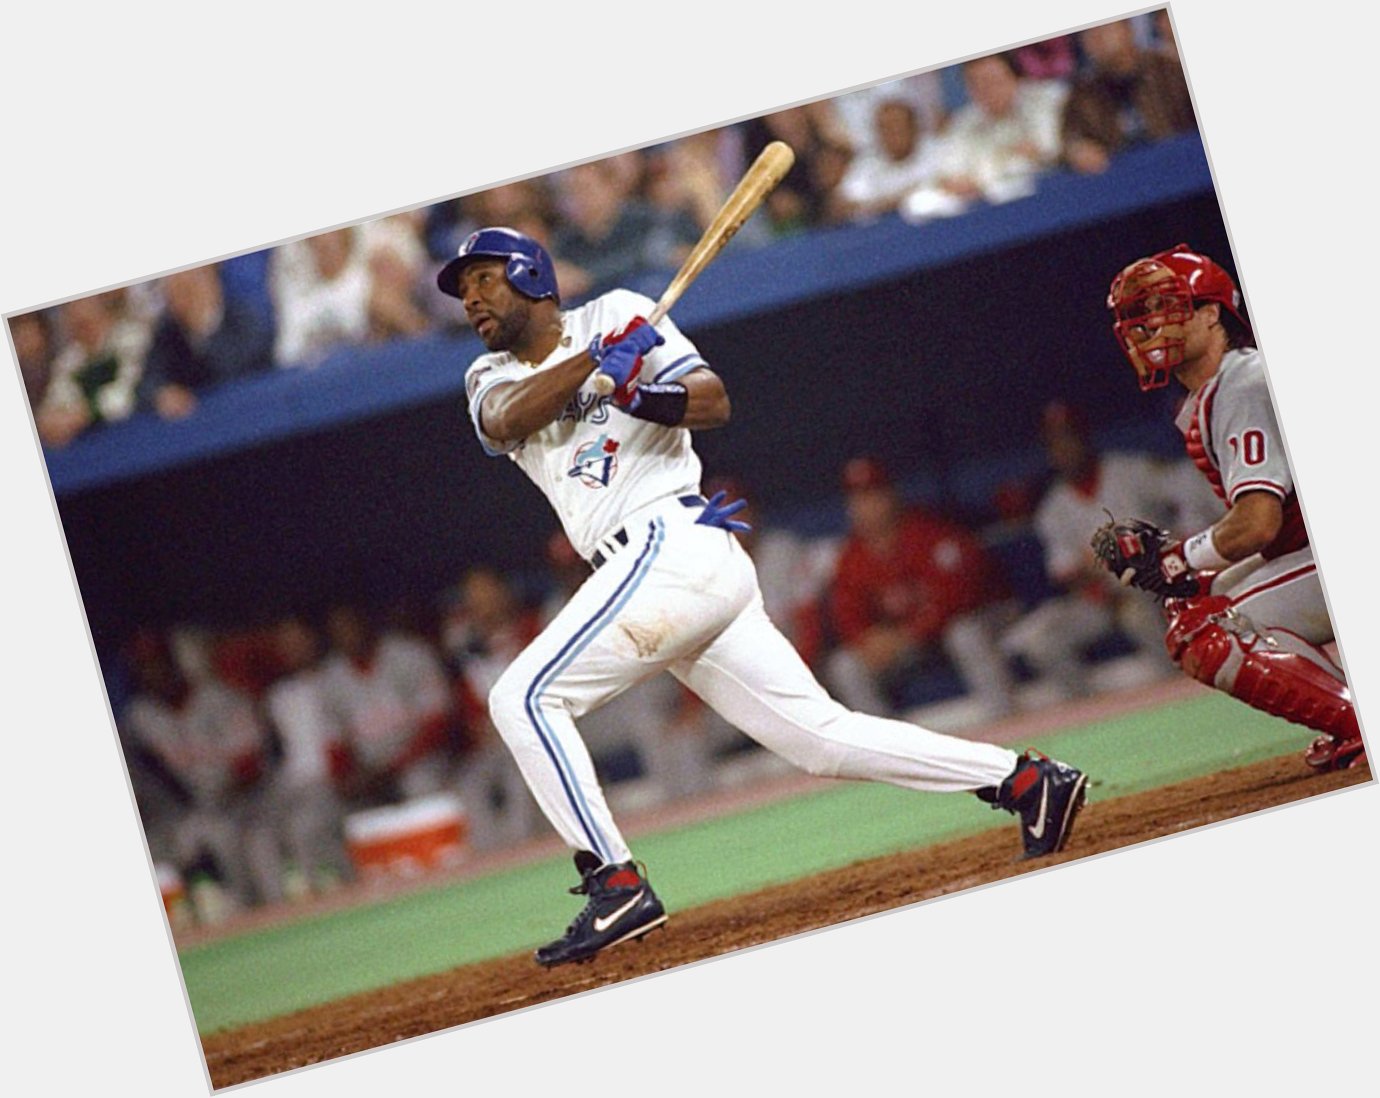 He would like to wish a happy birthday to former great Joe Carter. He turns 58 today. 